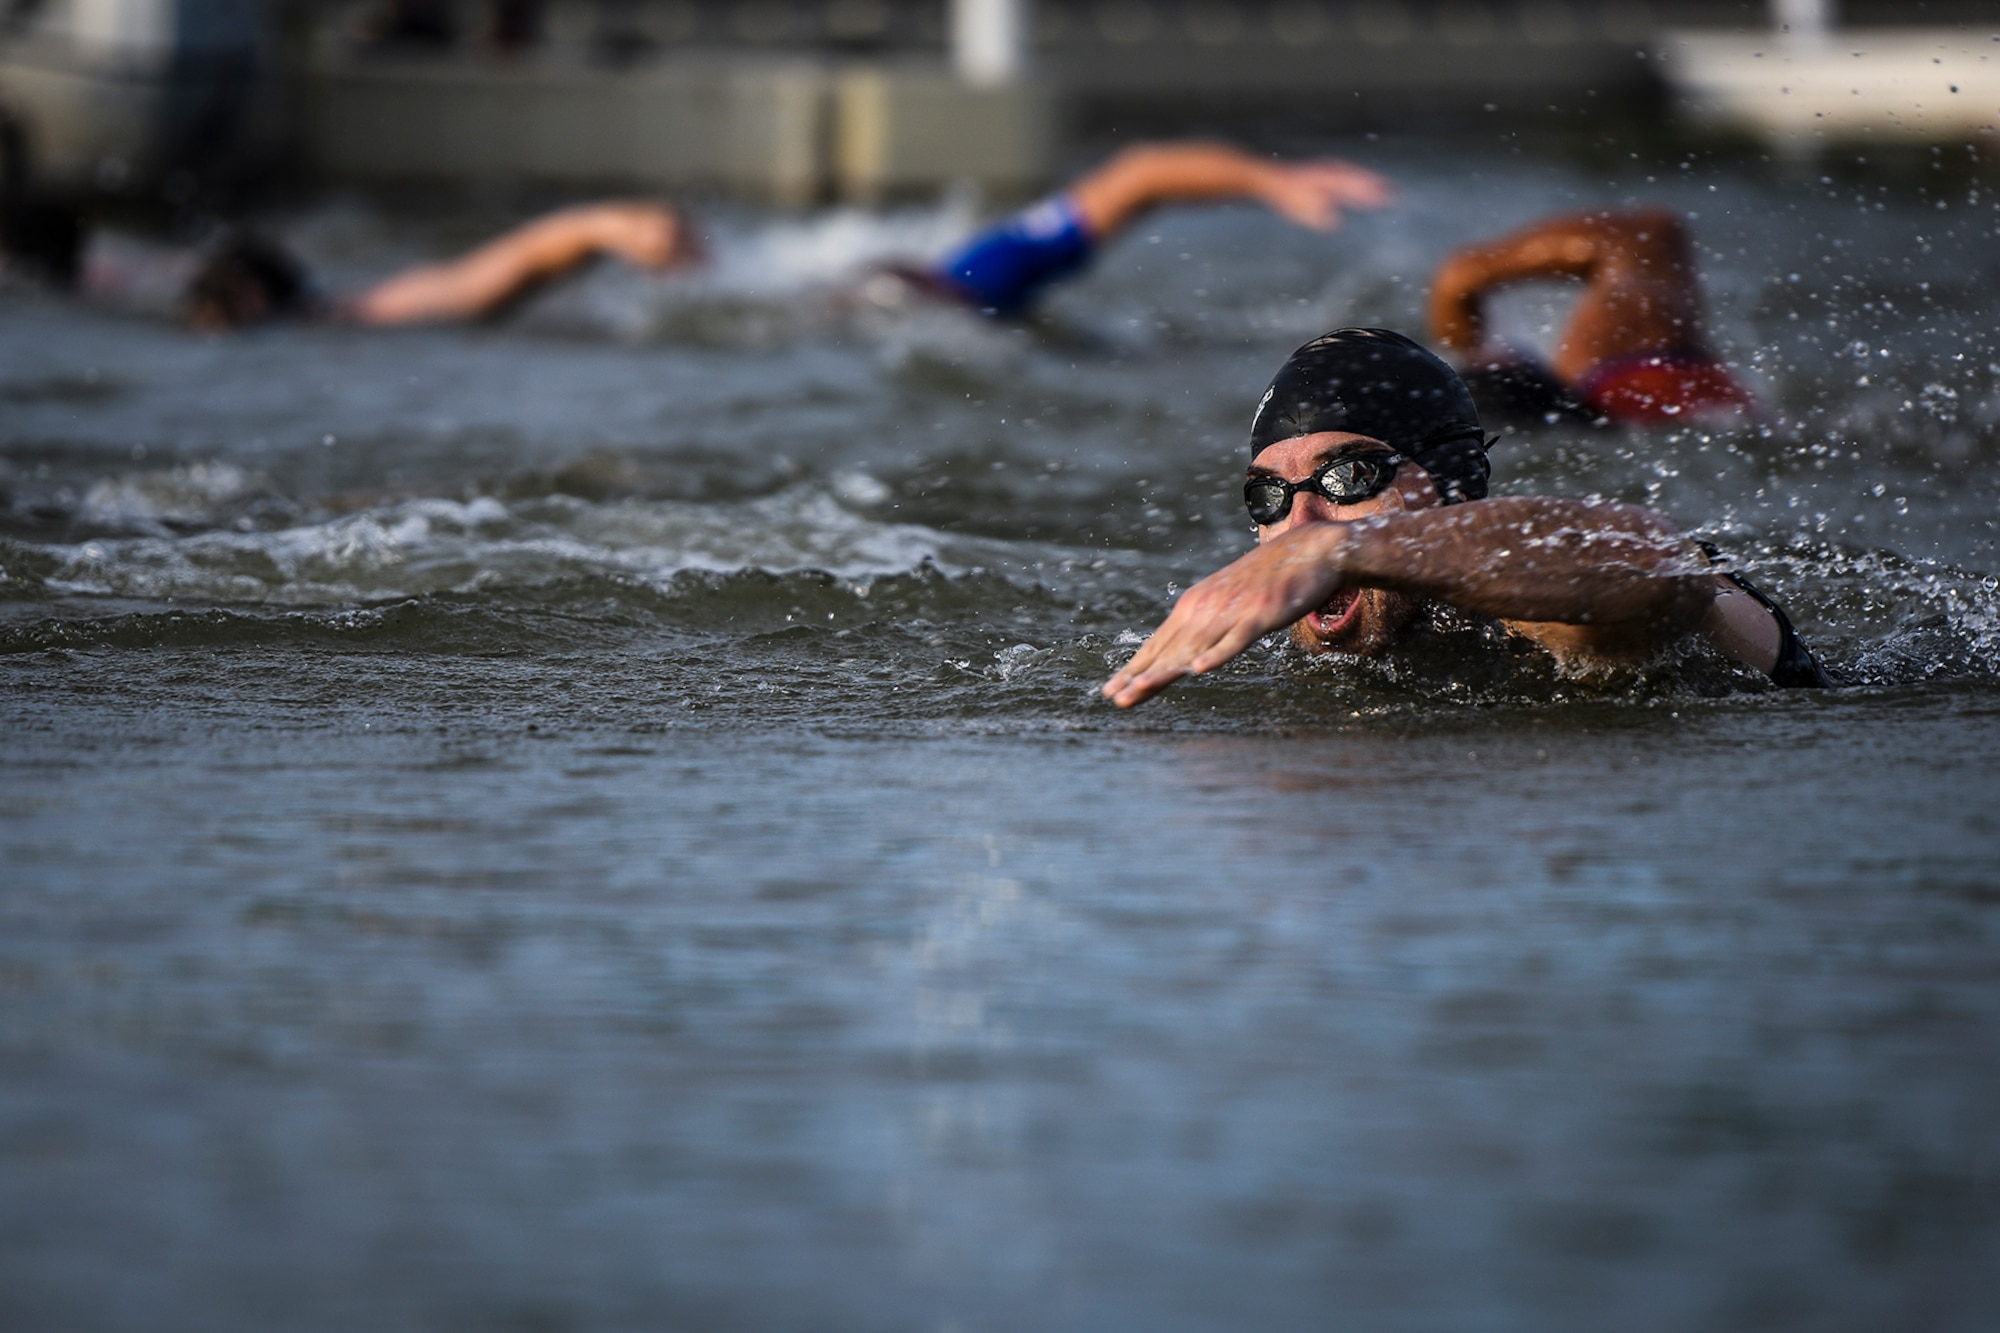 A swimmer makes a front crawl stroke during the Goodfellow Air Force Base Triathlon at the Goodfellow Recreation Camp in San Angelo, Texas, July 30, 2016. Civilians and military service members competed in the race which began with a 400-meter swim. (U.S. Air Force photo by Senior Airman Devin Boyer/Released)